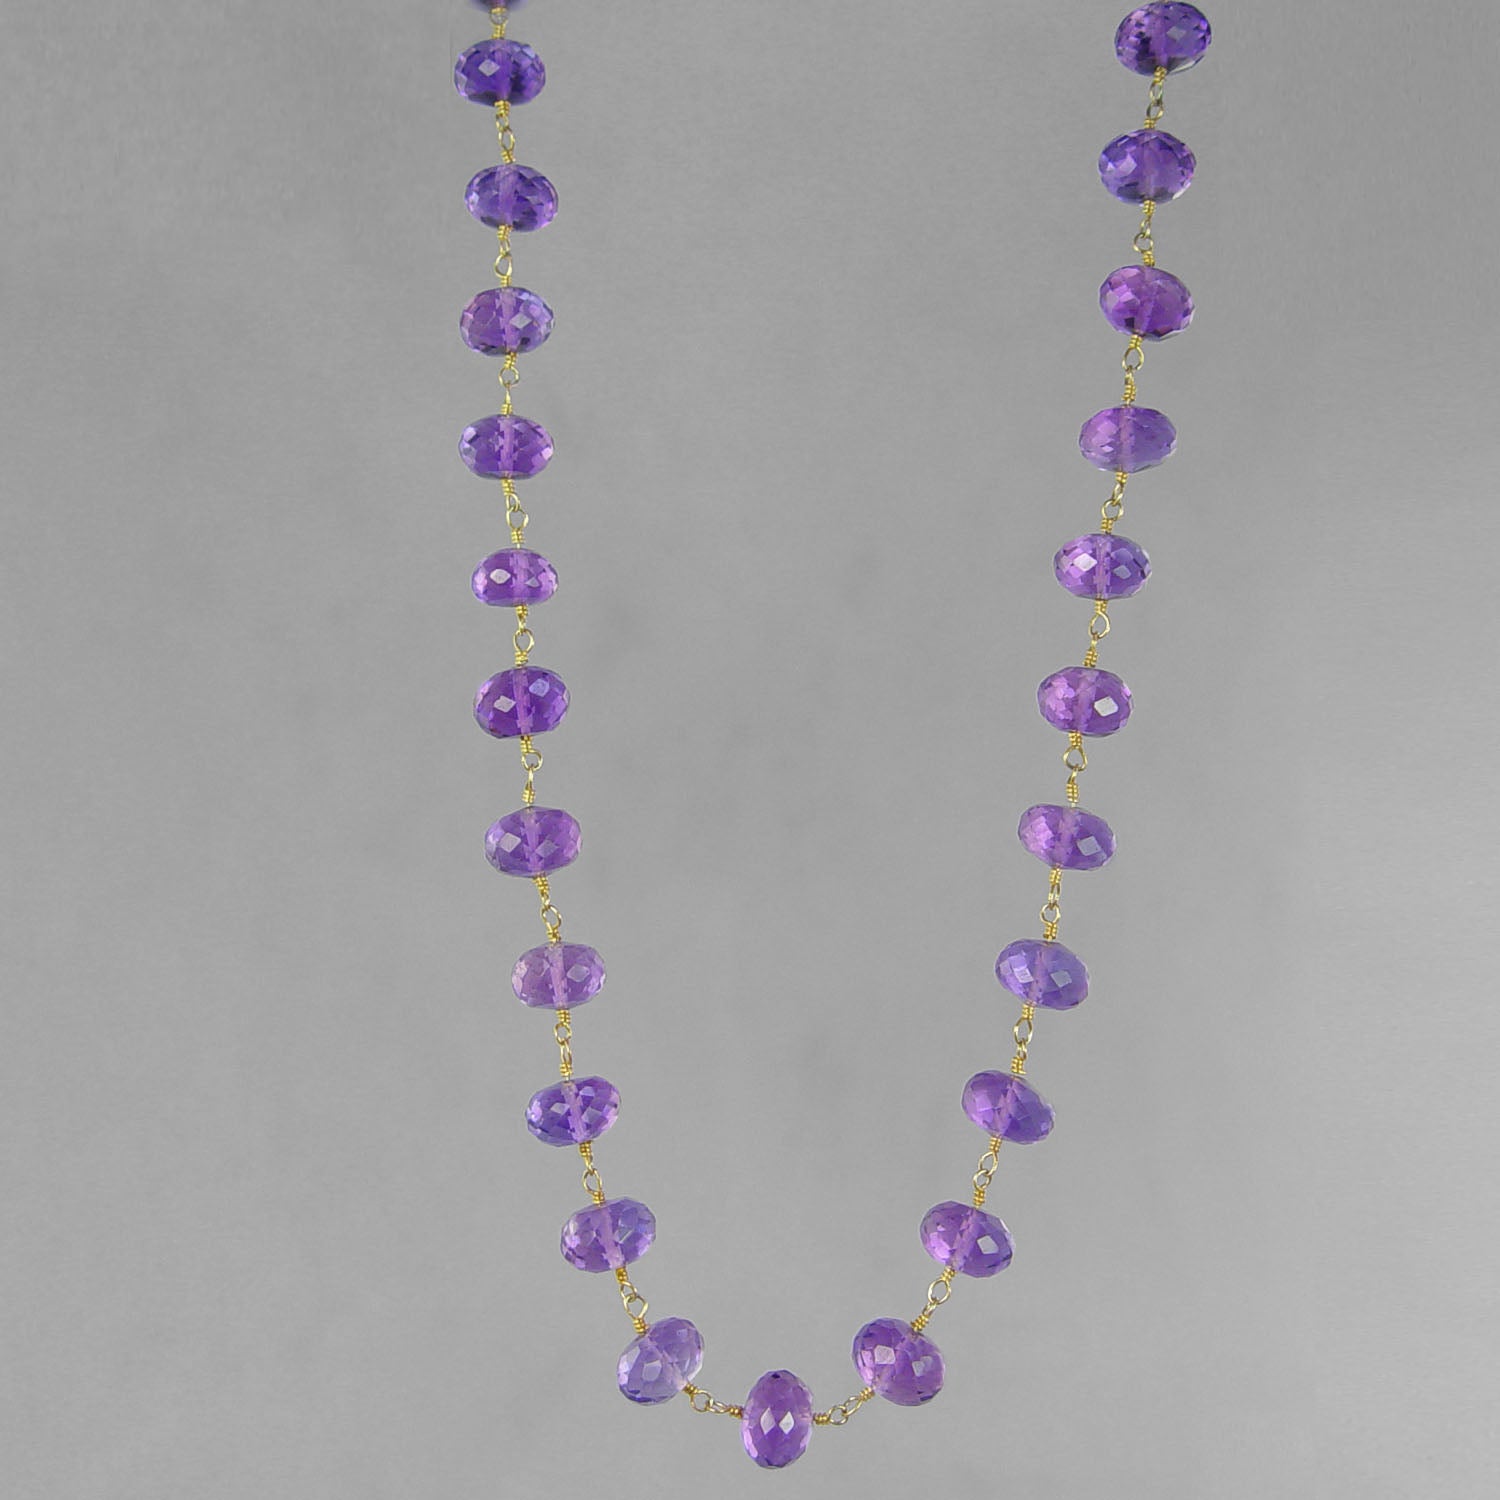 Amethyst Faceted Rondelle Beads on Gold Filled Wire 18" Necklace